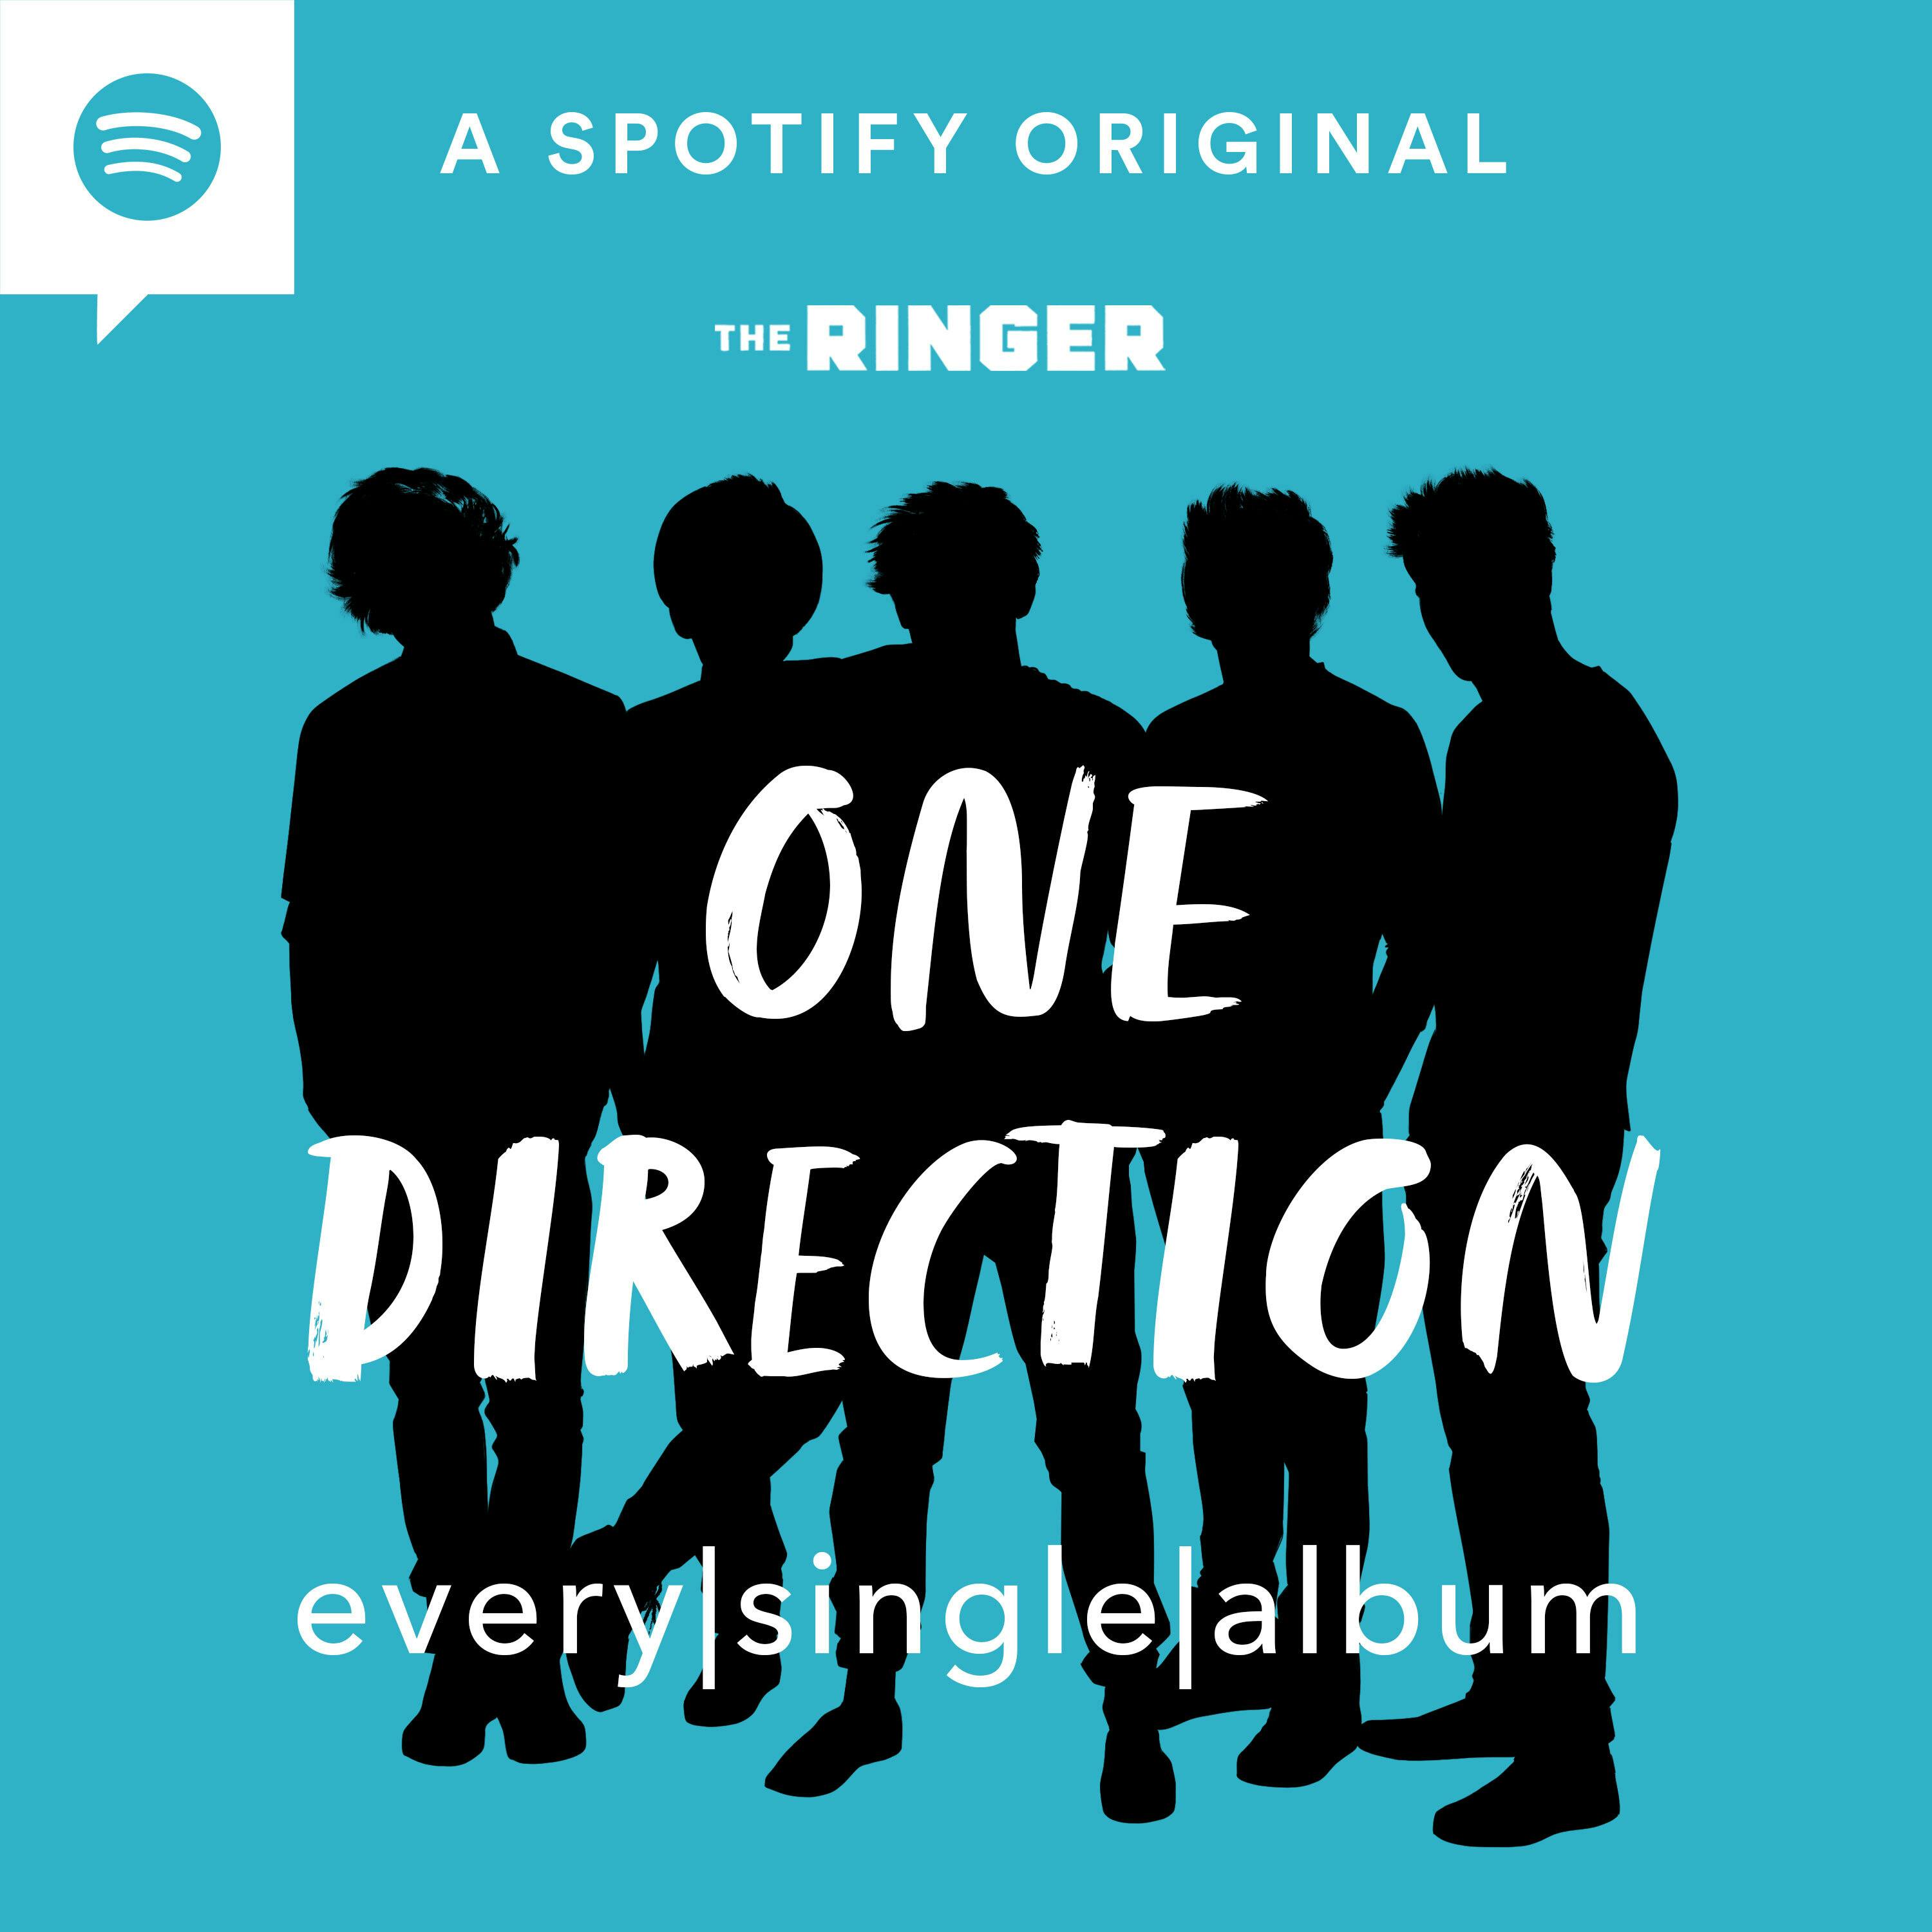 Mailbag and Song Draft | Every Single Album: One Direction